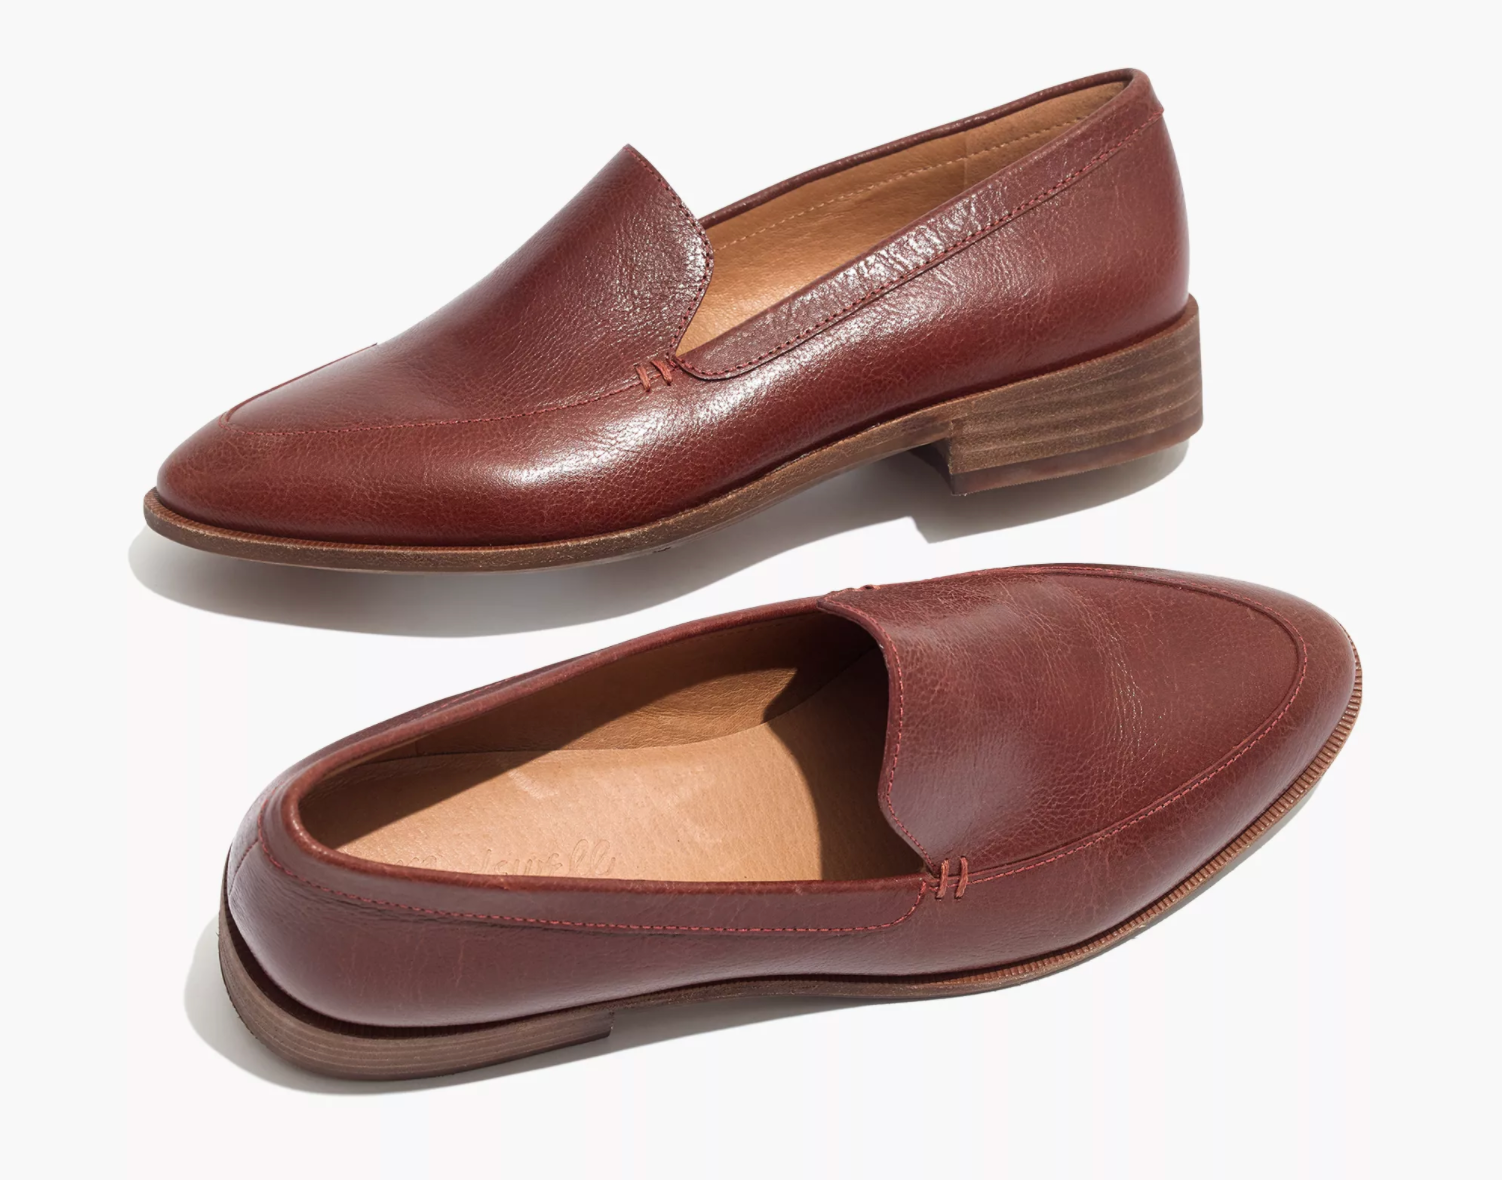 The brown pointed toe loafers